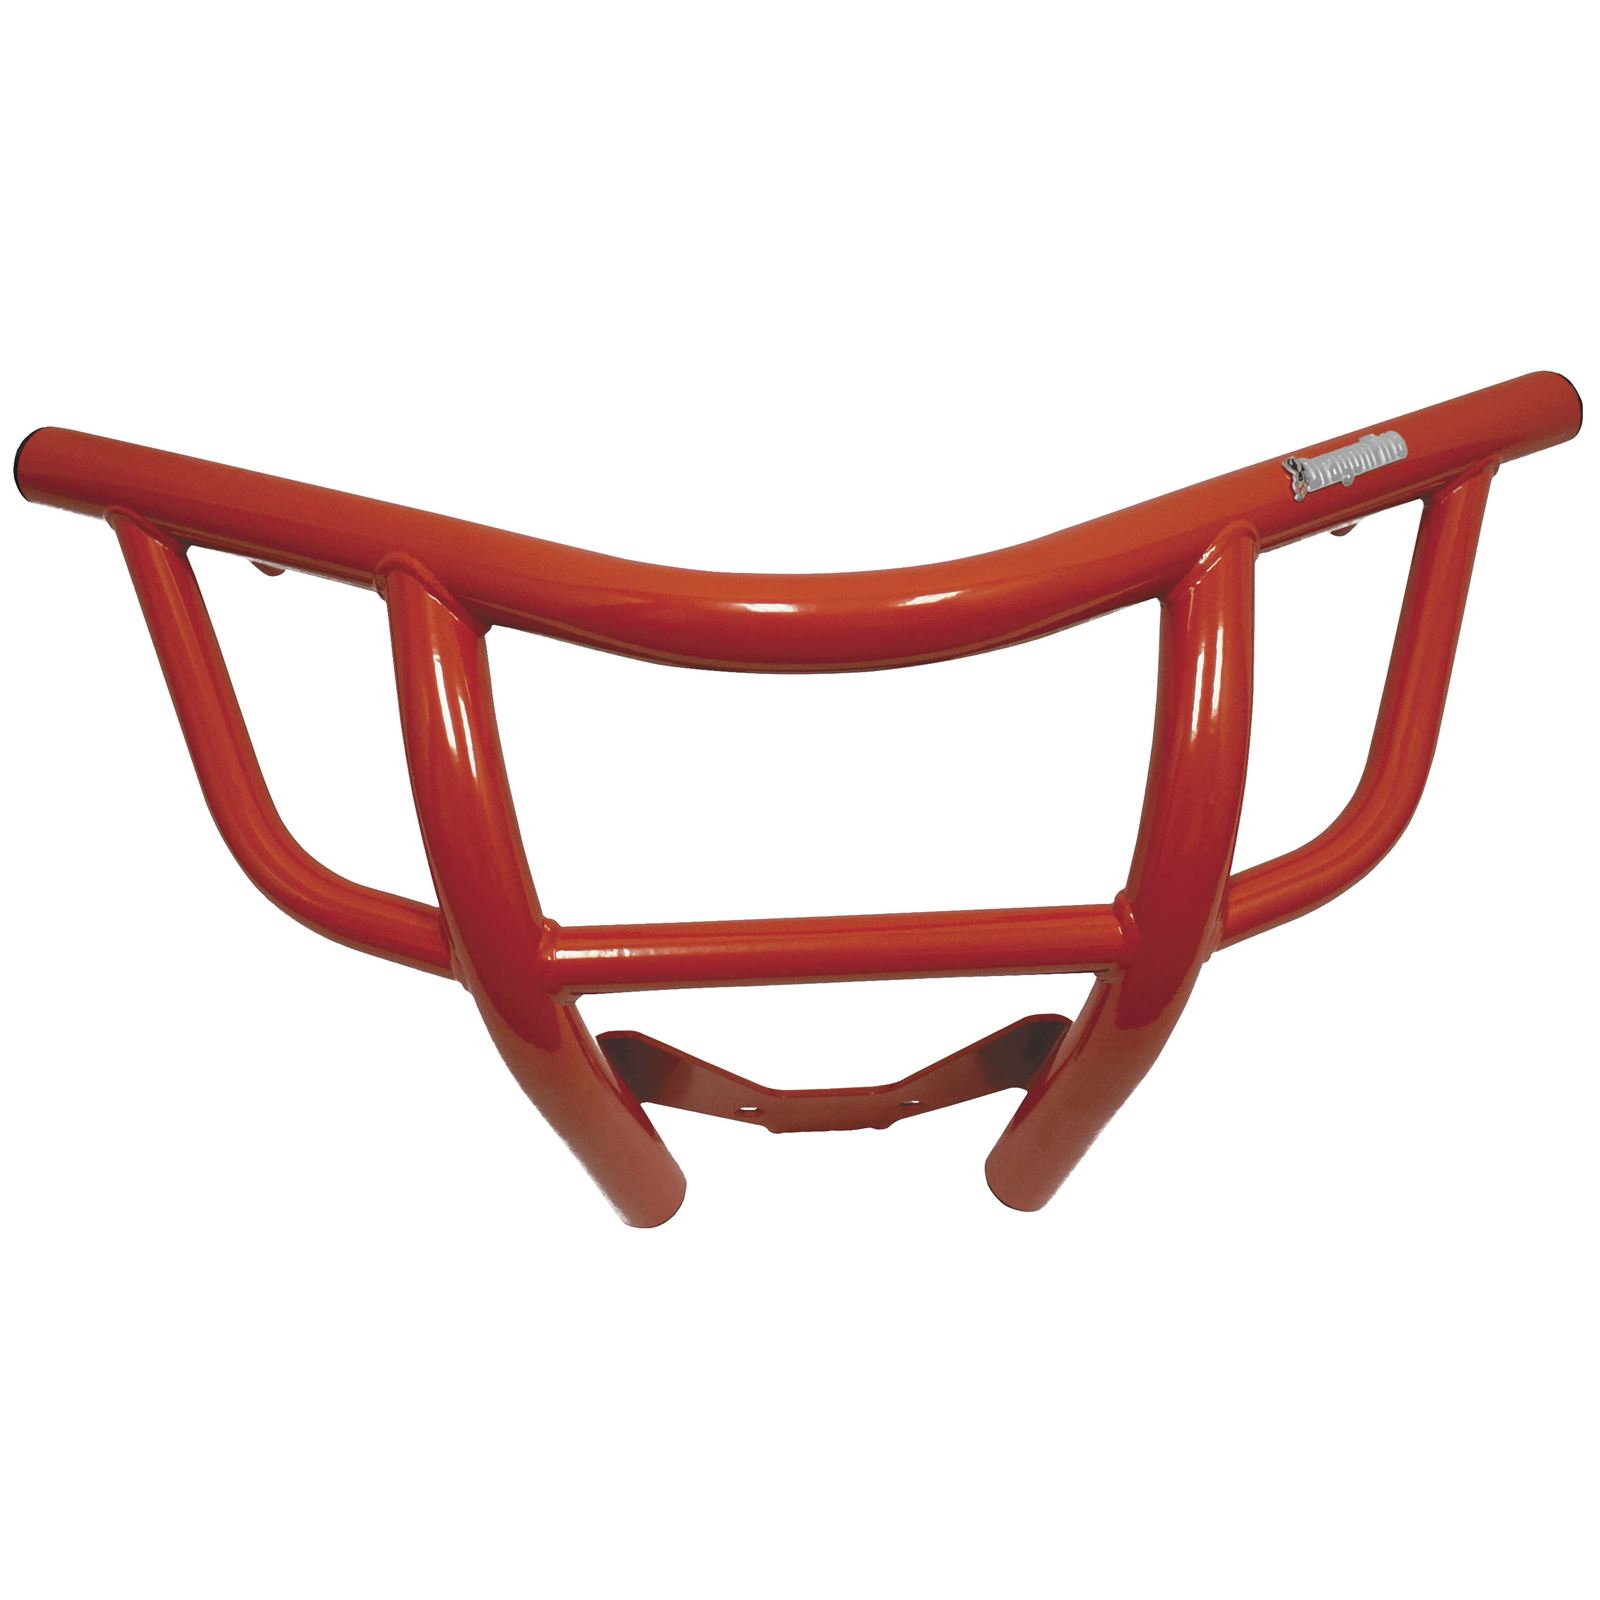 Dragonfire Racing Standard Front Bumpers - Red